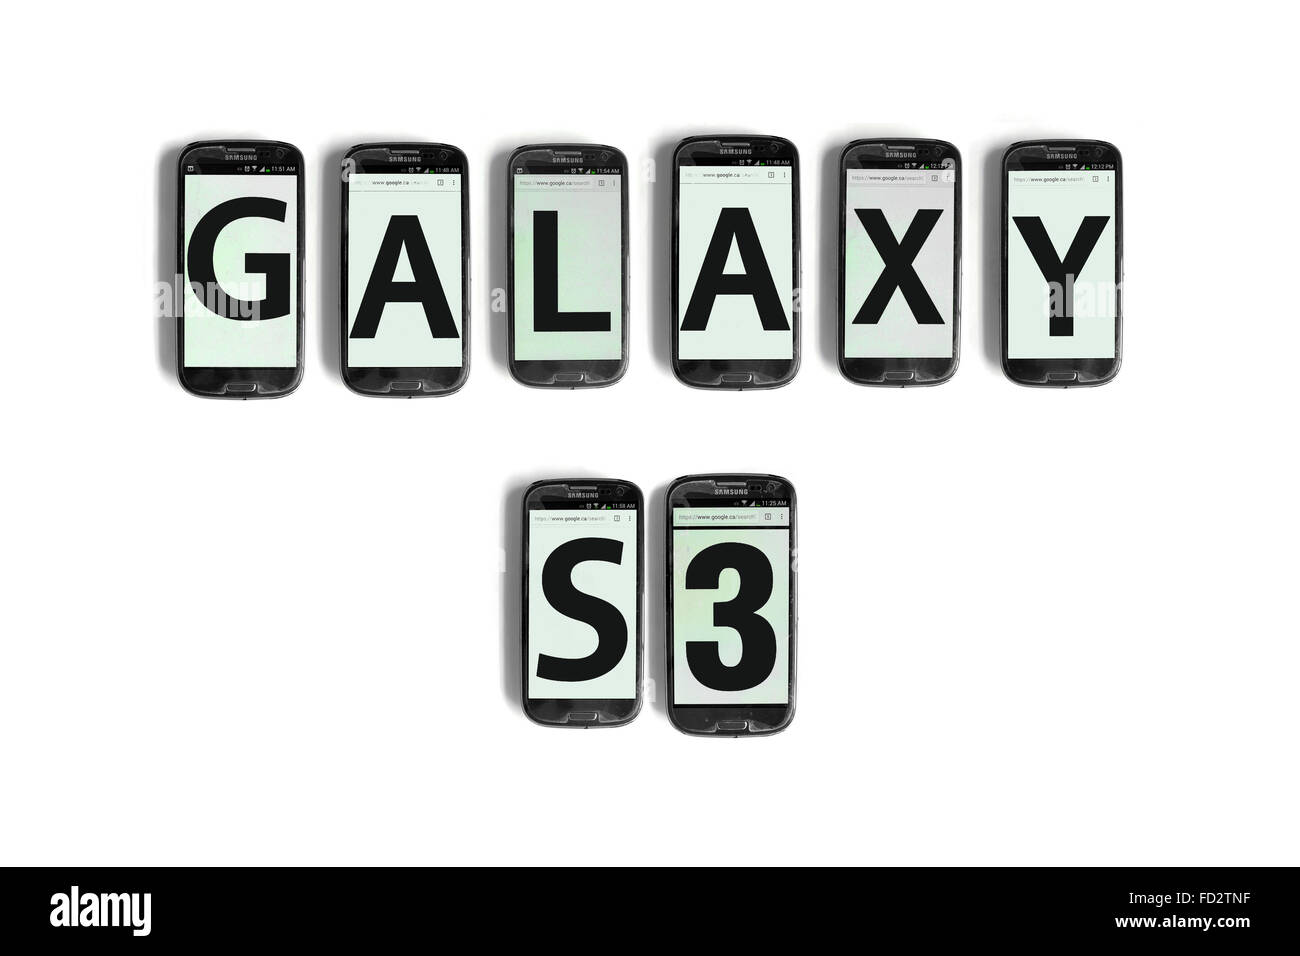 Galaxy S3 written on the screens of smartphones photographed against a white background. Stock Photo